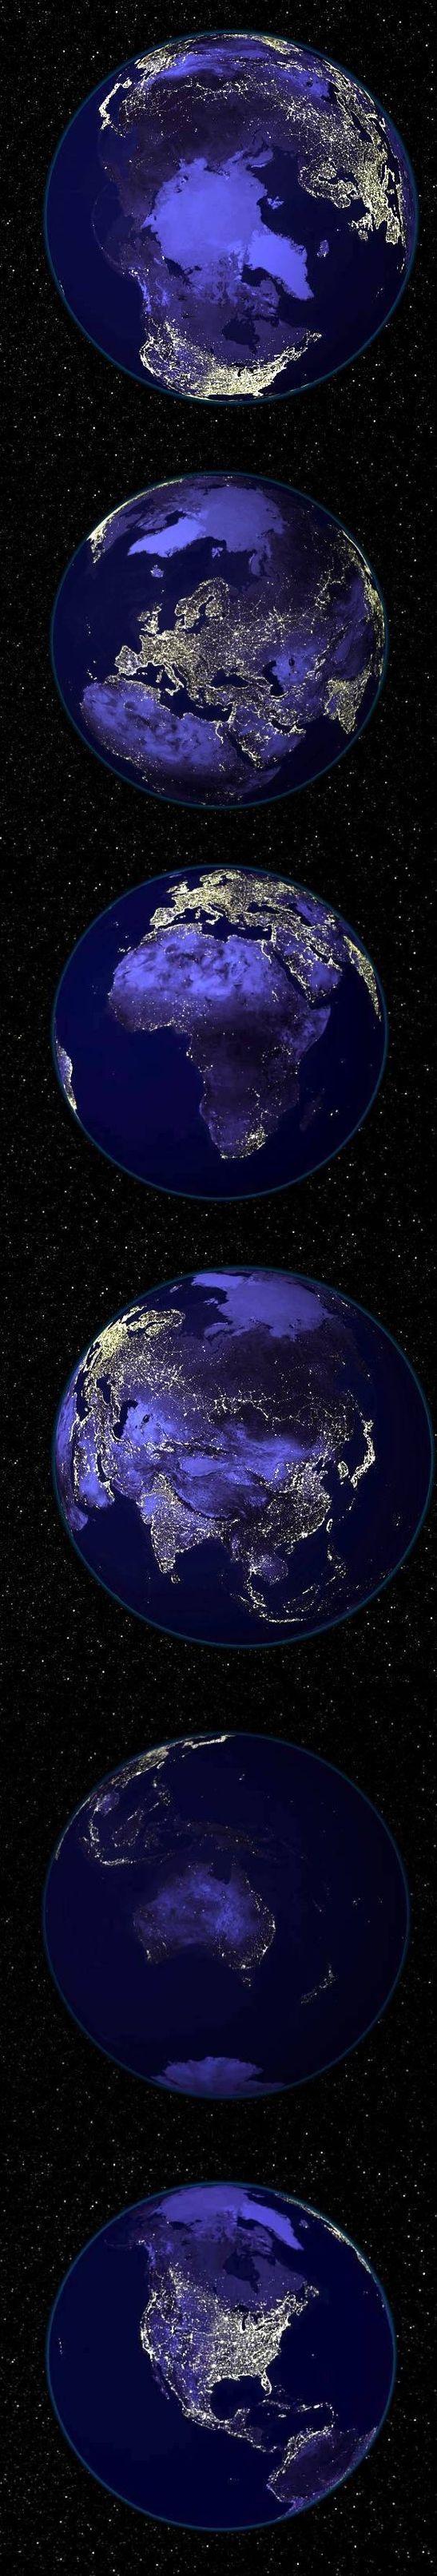 PLANET EARTH AT NIGHT